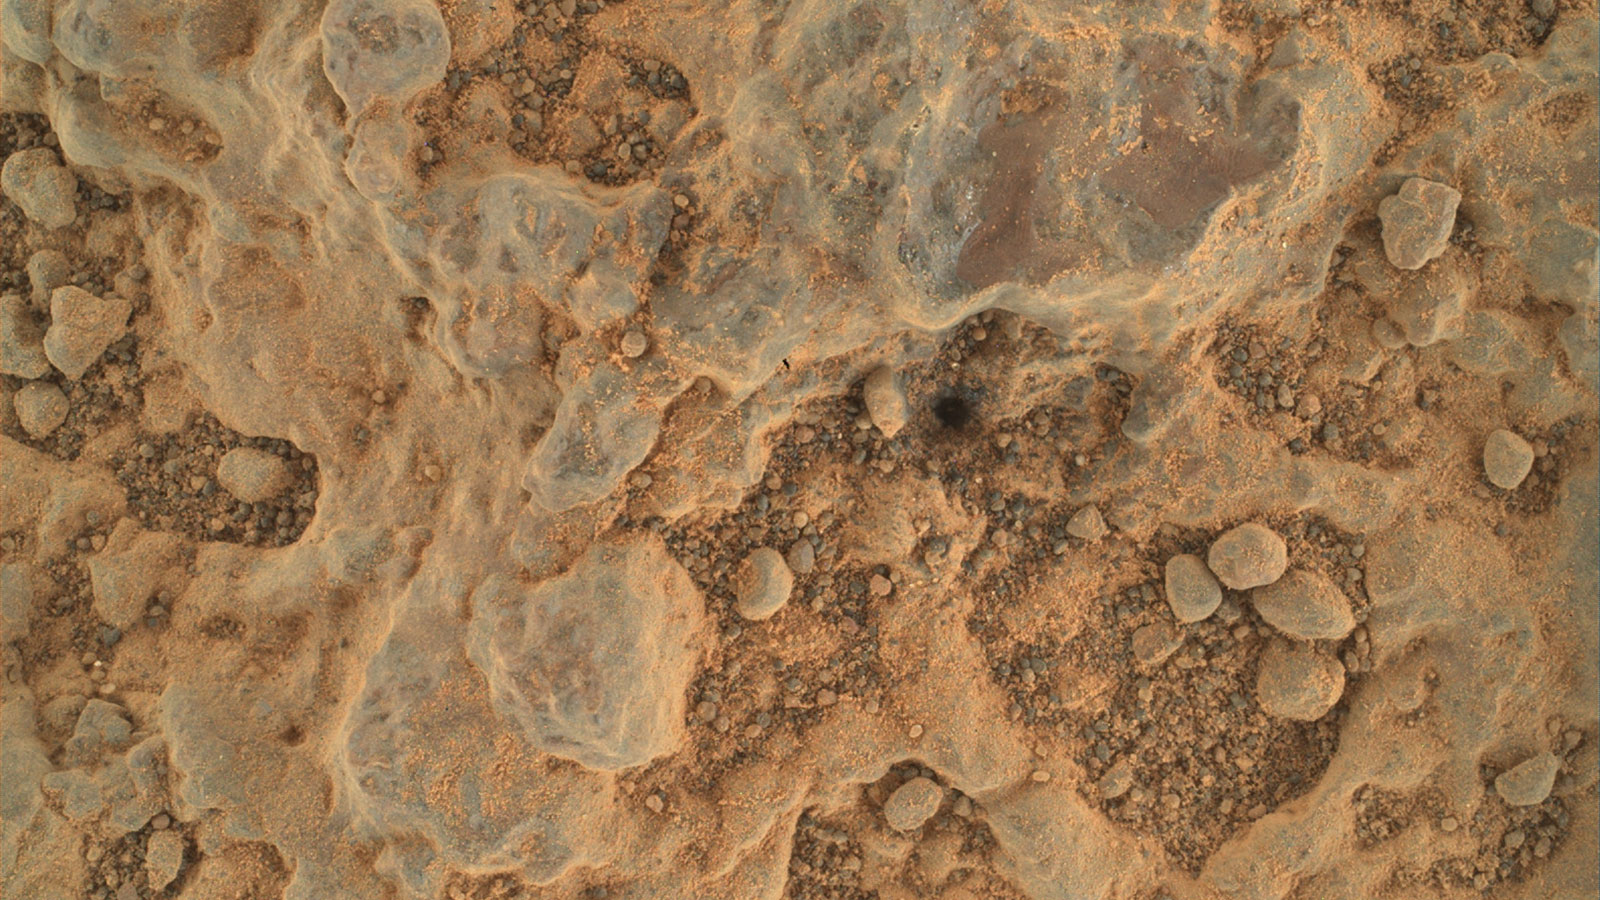 NASA’s Perseverance Mars rover took this close-up of a rock target nicknamed “Foux” 